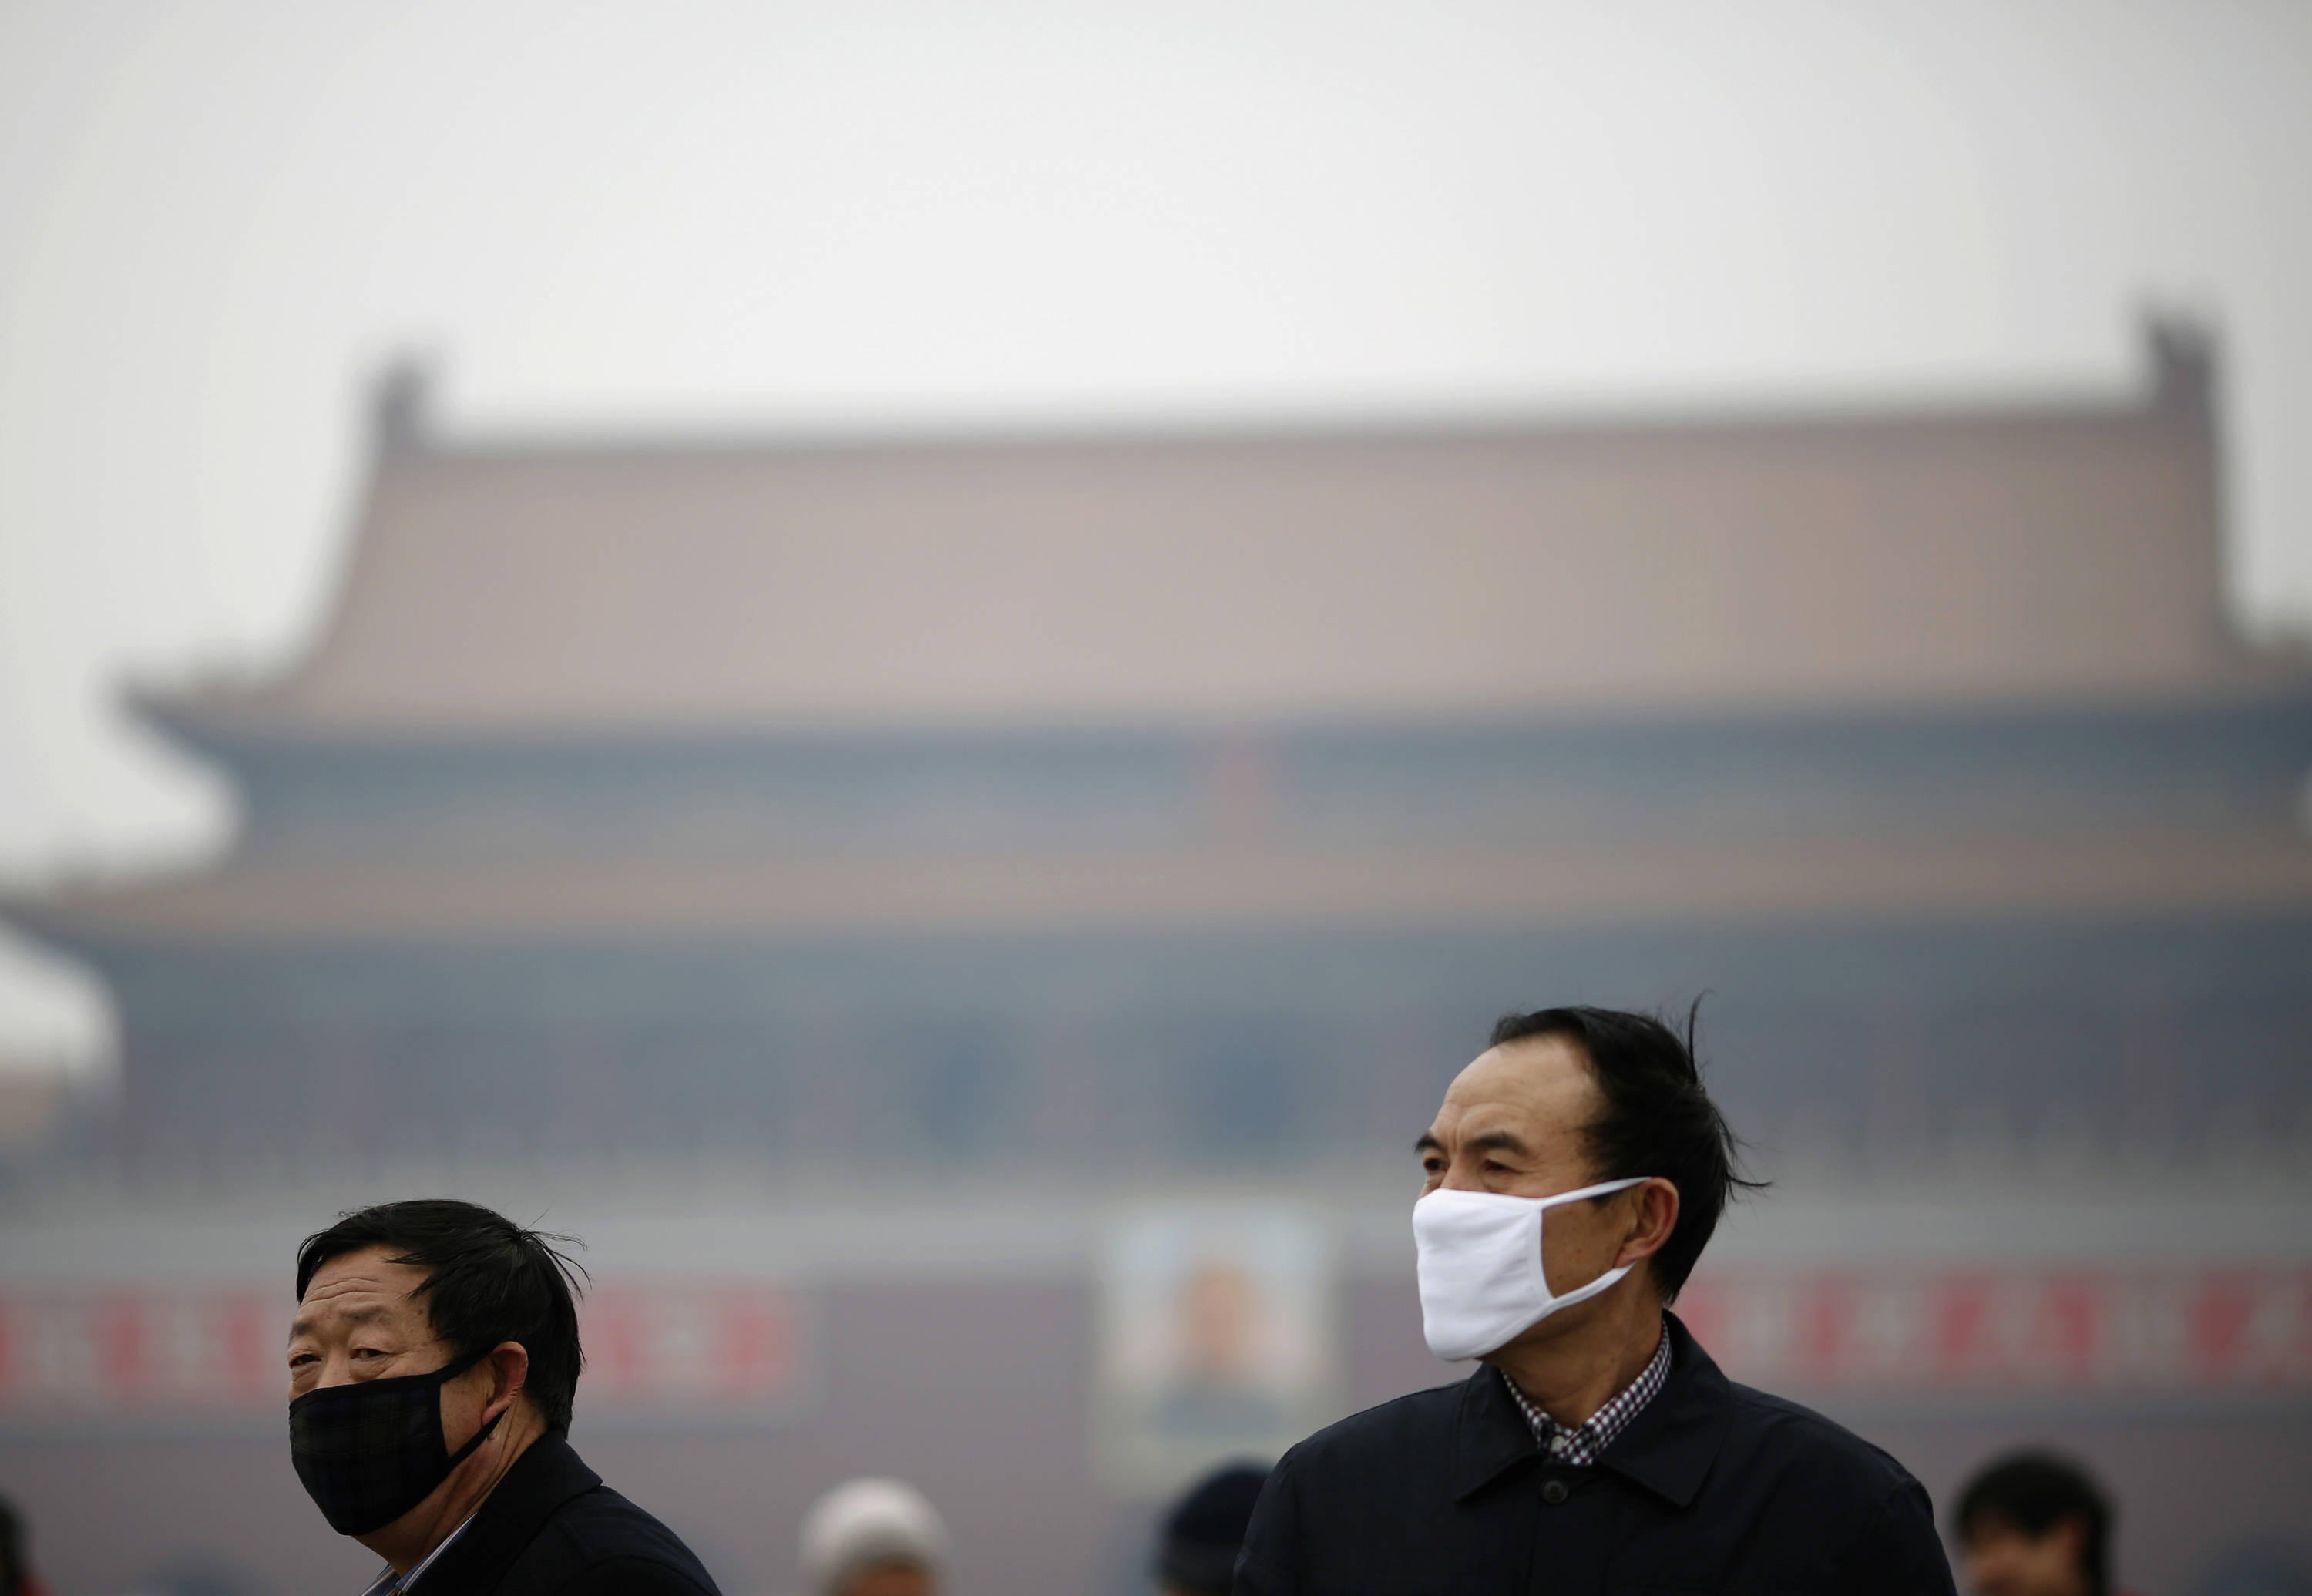 People wearing masks are seen on a hazy day at Tiananmen Square in Beijing